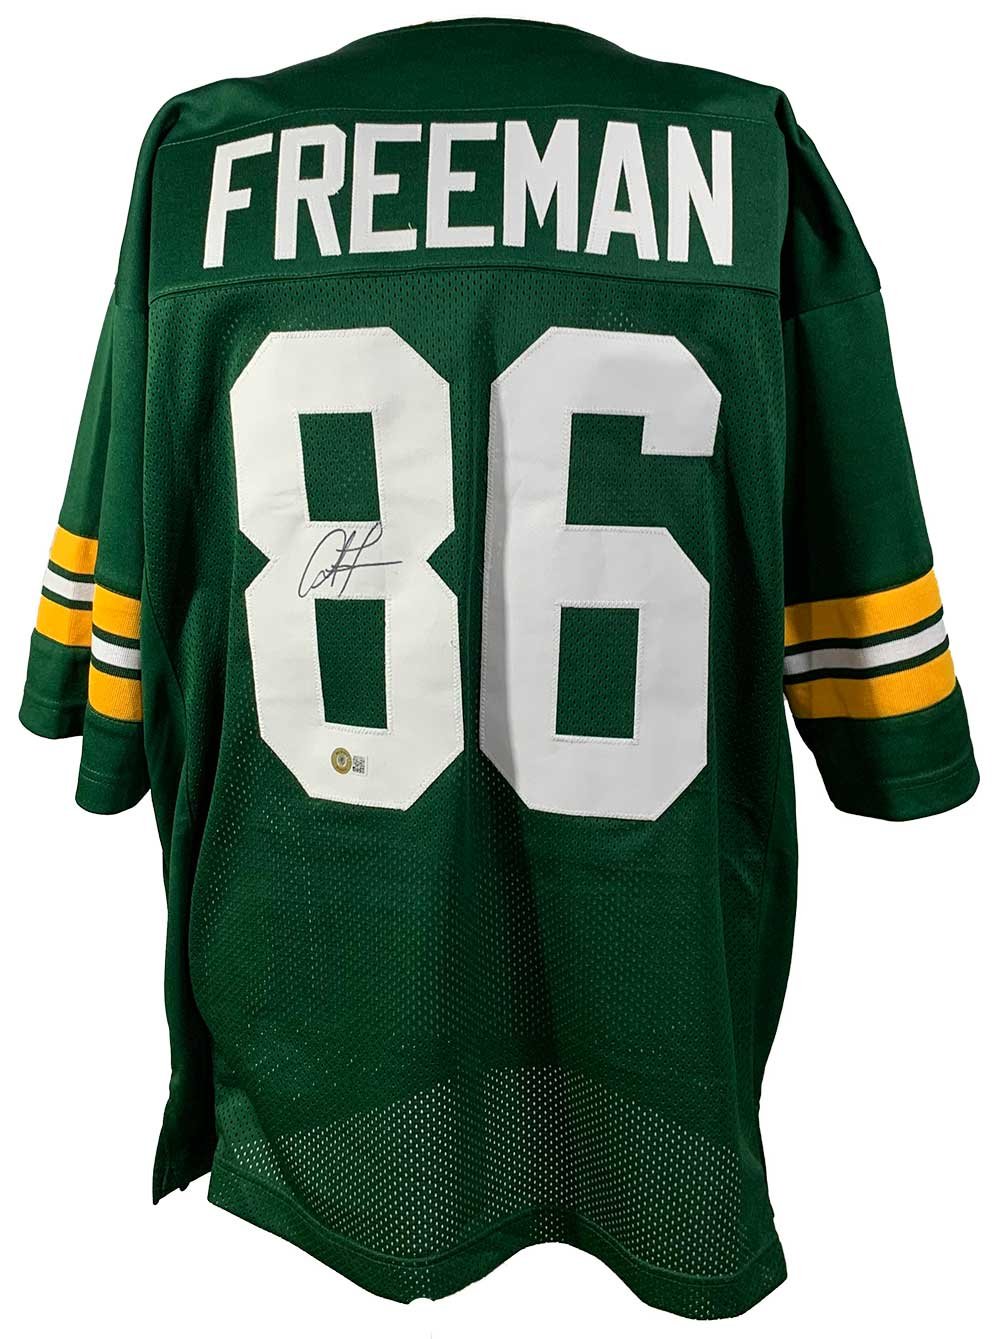 Green Bay Packers Antonio Freeman Autographed Pro Style Green